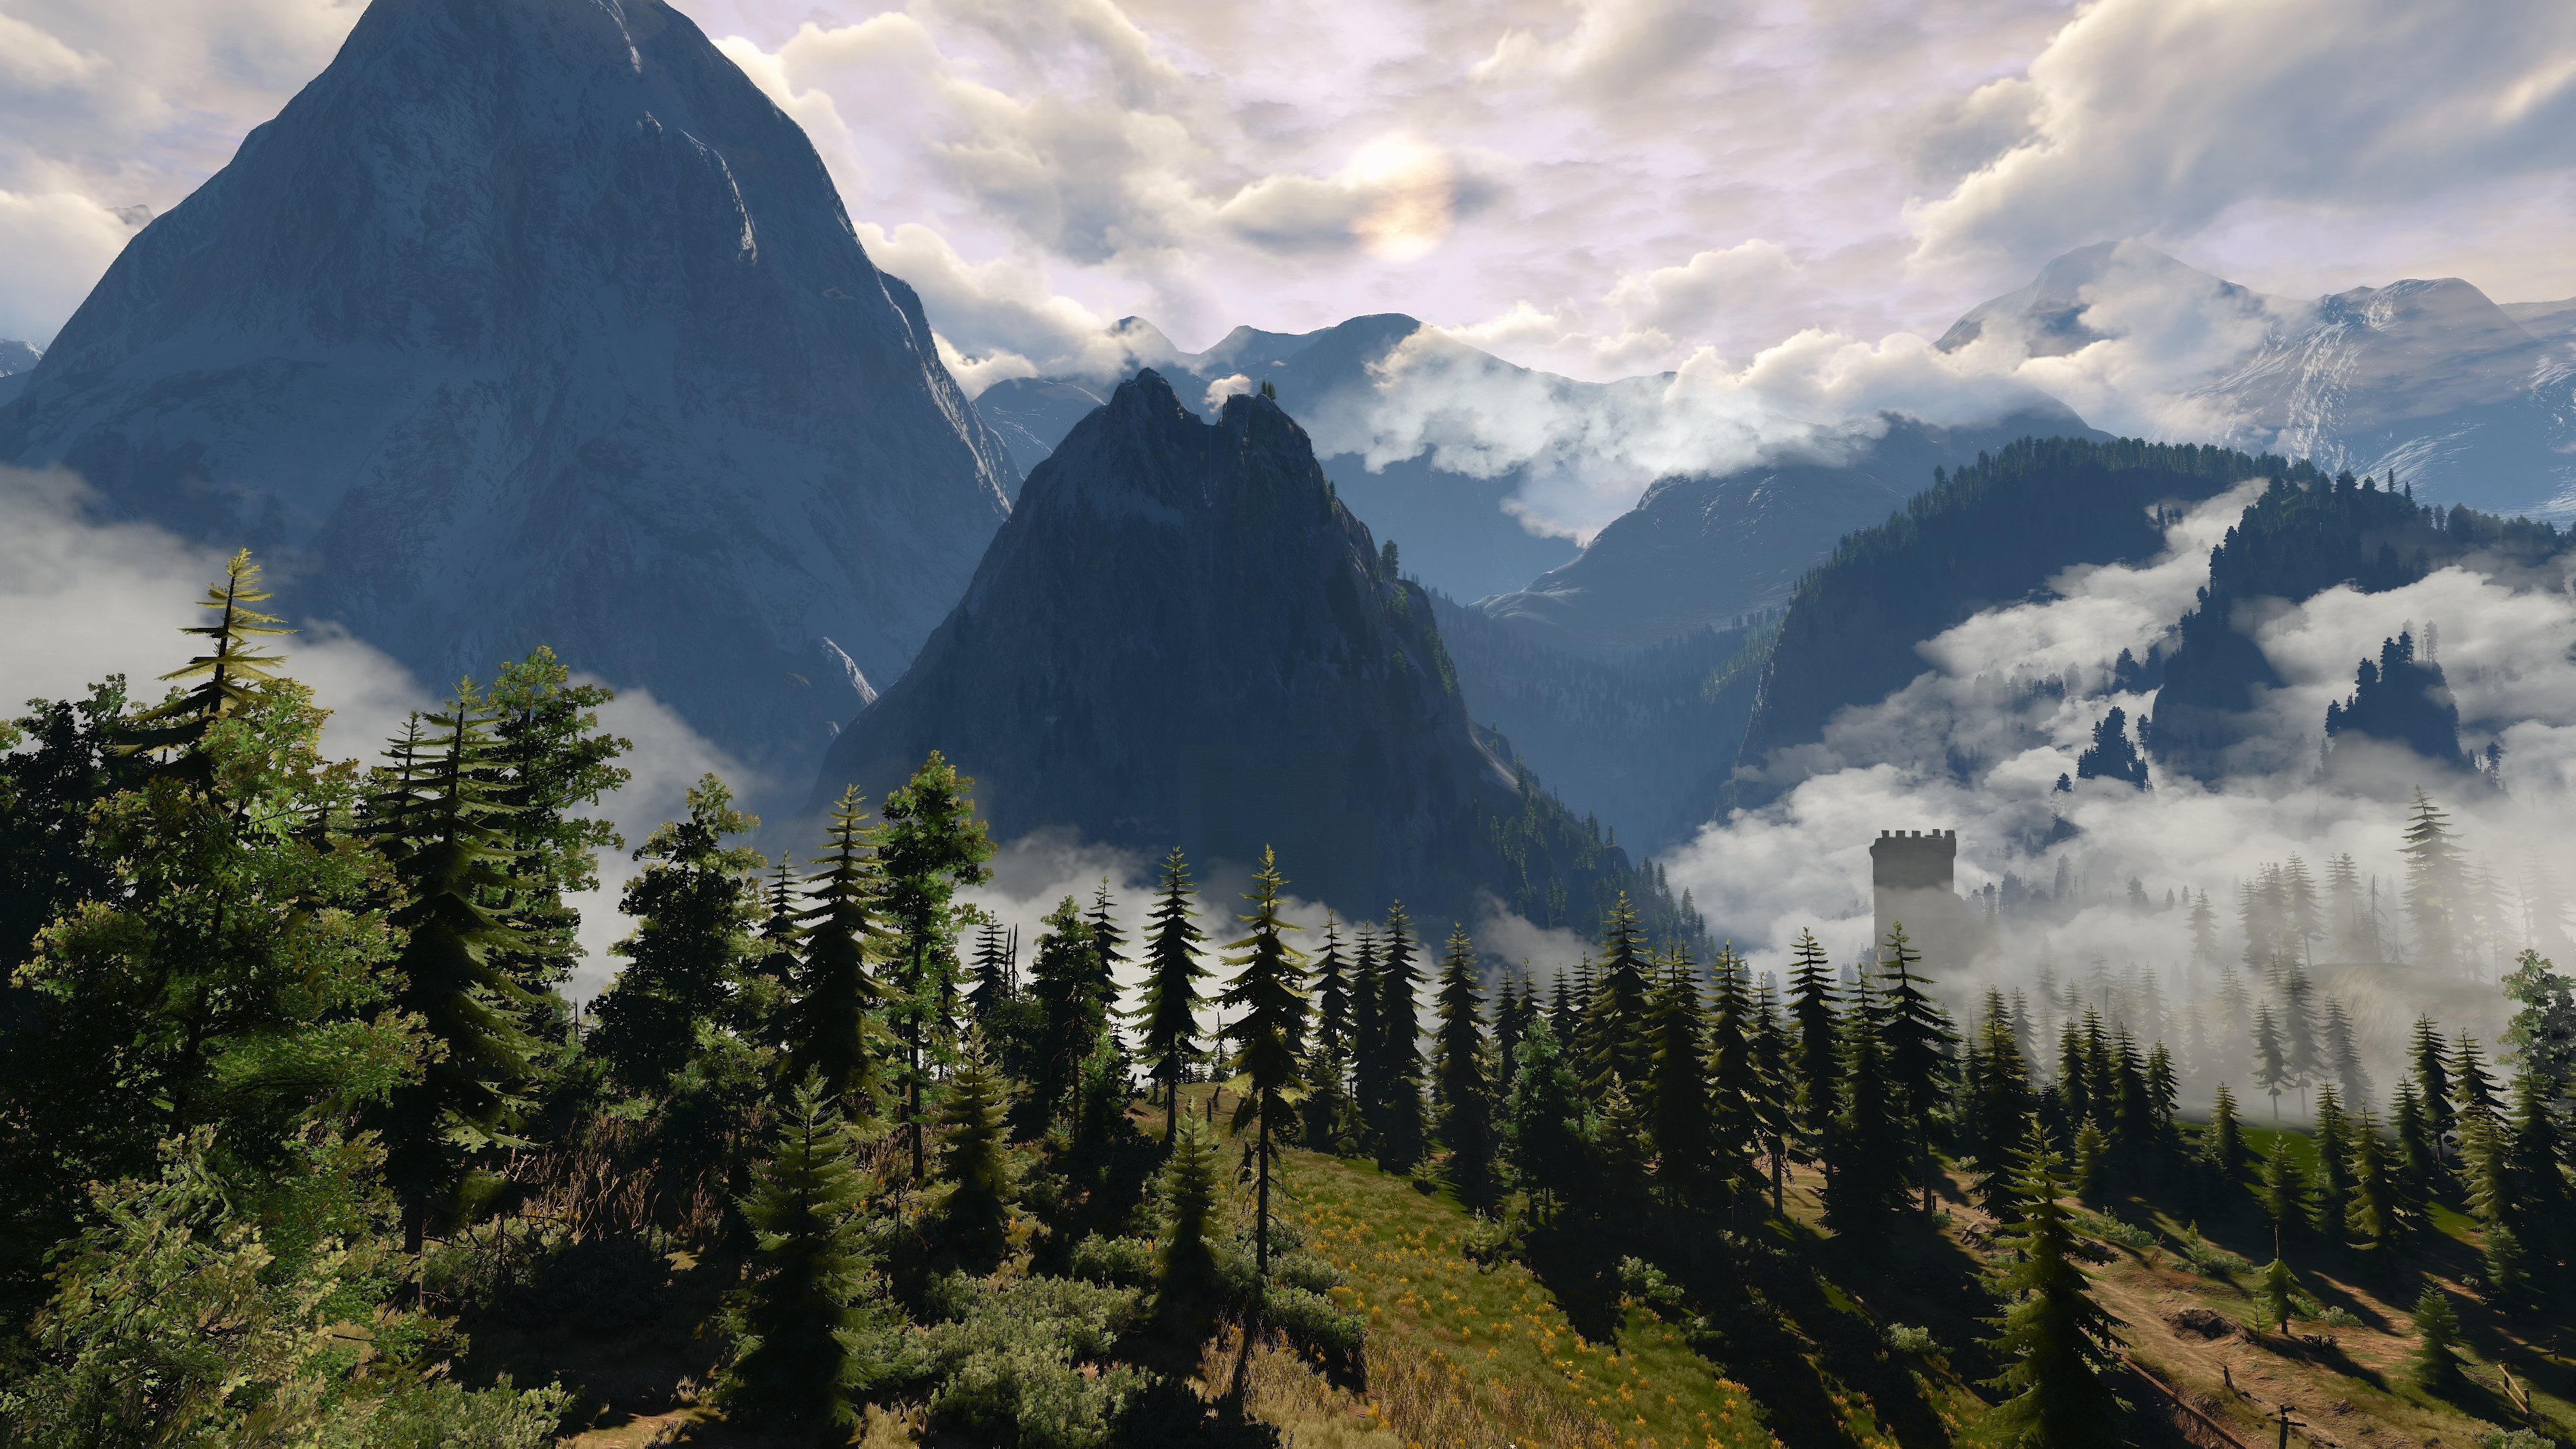 General 3840x2160 The Witcher 3: Wild Hunt PC gaming screen shot Kaer Morhen mountains clouds trees sky video game art landscape video games sunlight CGI nature forest